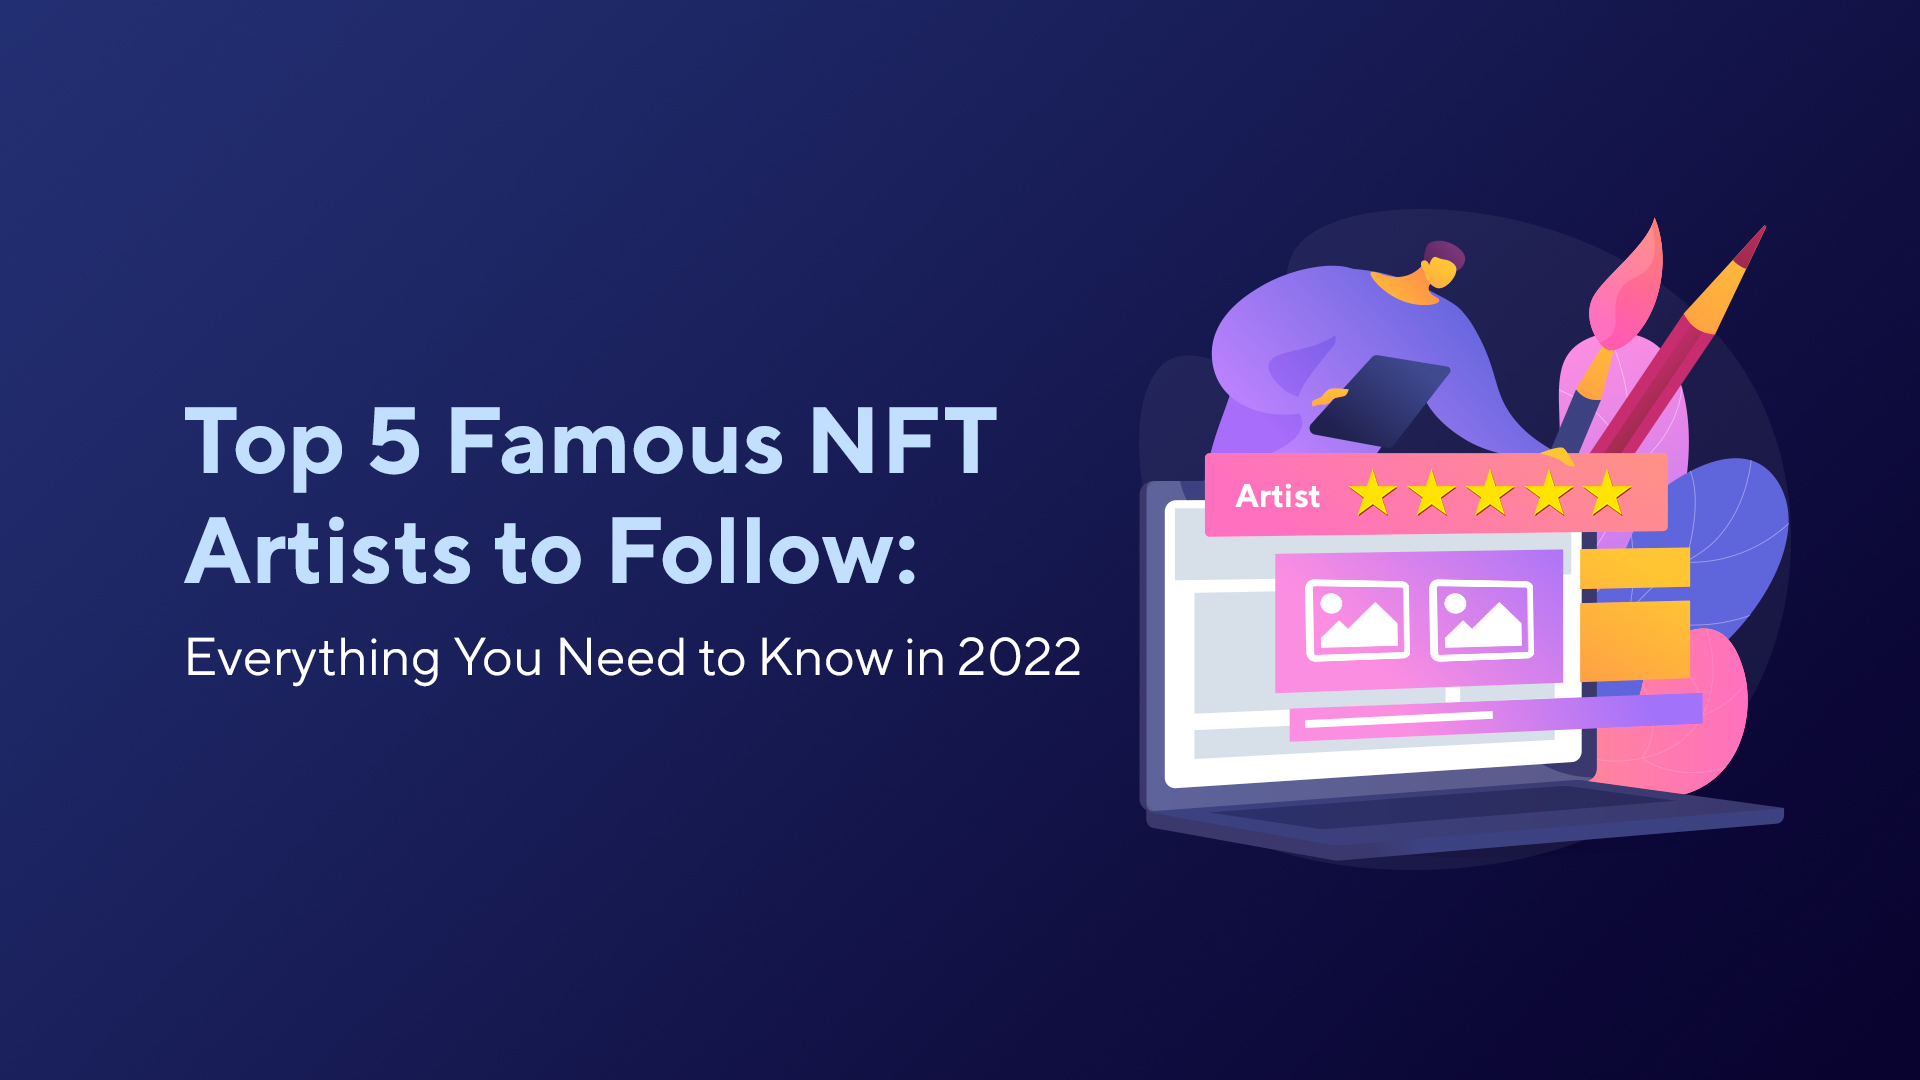 Top 5 Famous NFT Artists to Follow: Everything You Need to Know in 2022